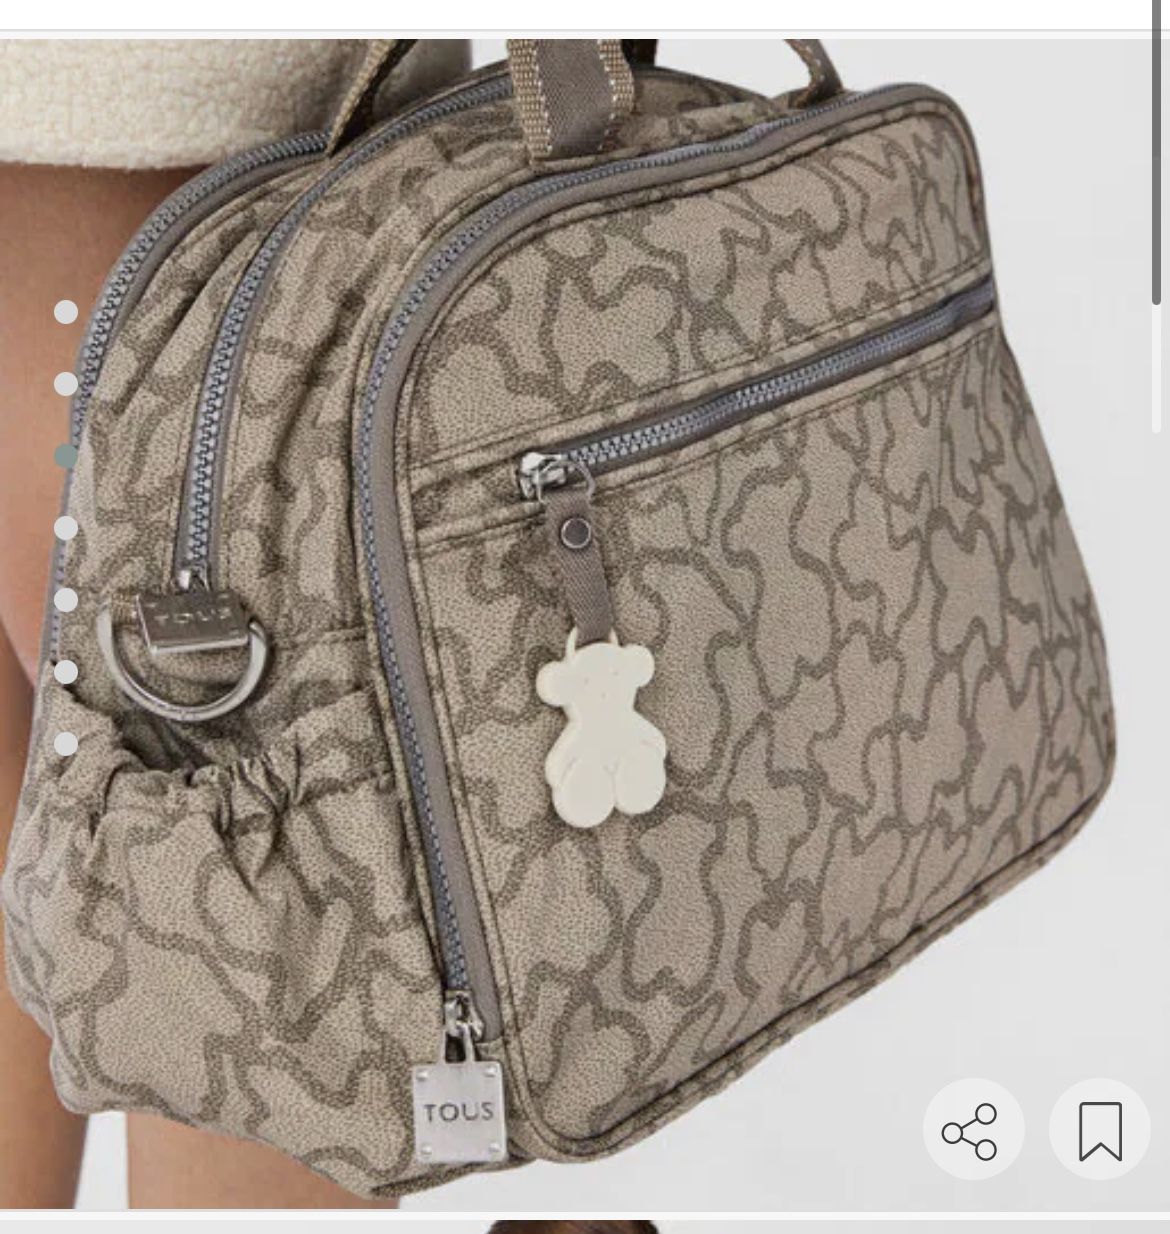 Tory Burch Thea Snake Skin Triple Zip Compartment Satchel for Sale in  Spanaway, WA - OfferUp